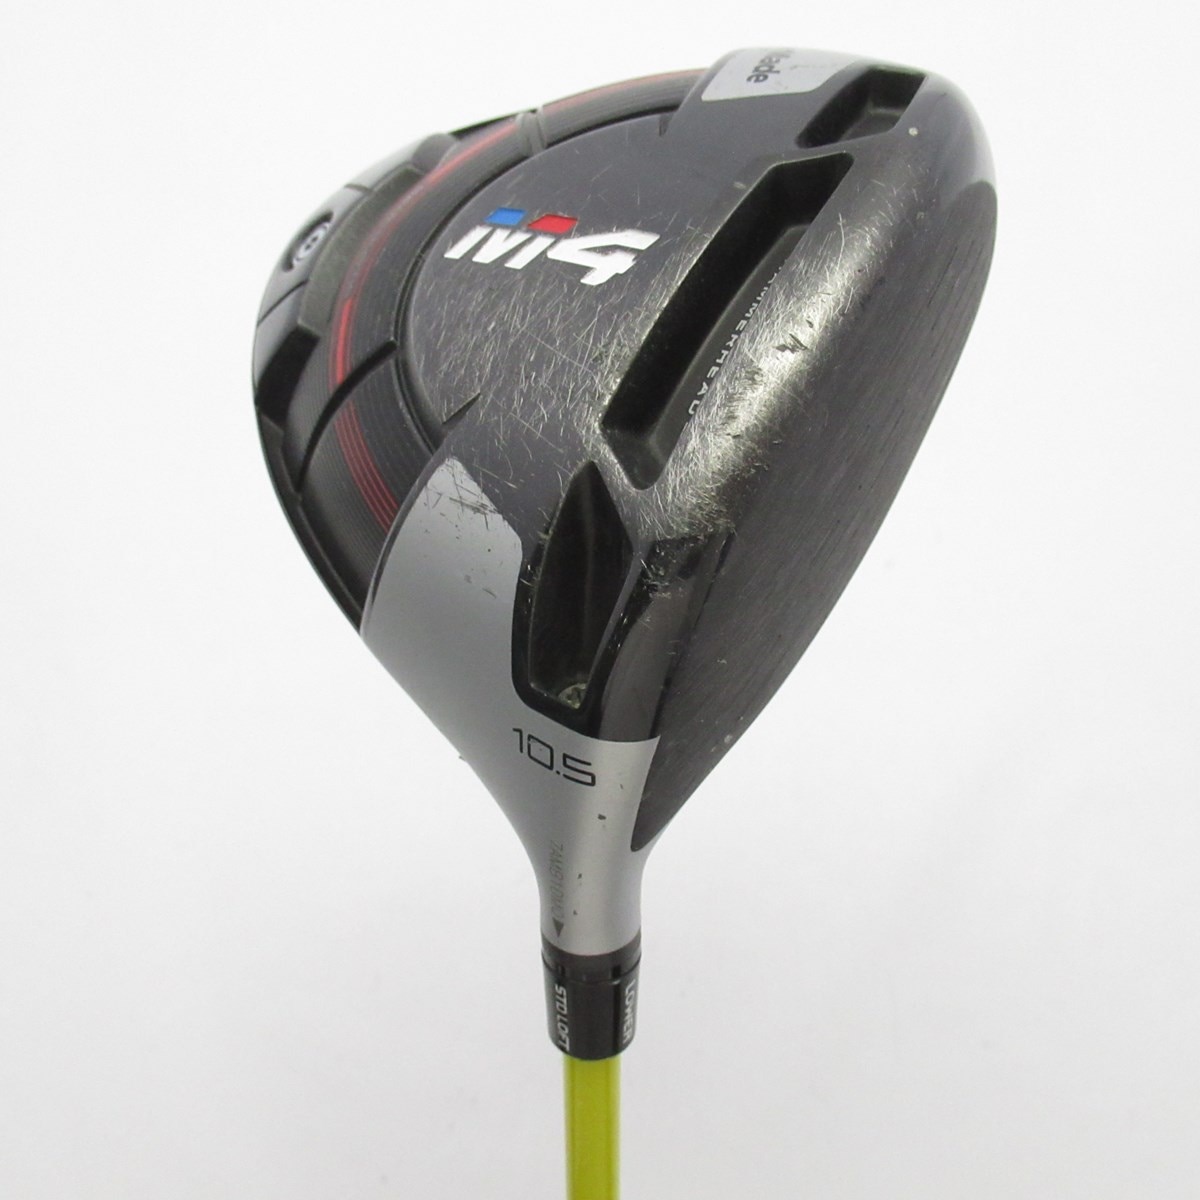 NEW ARRIVAL】 TaylorMade - M4 ドライバー(10.5°)の通販 by カテキン ...